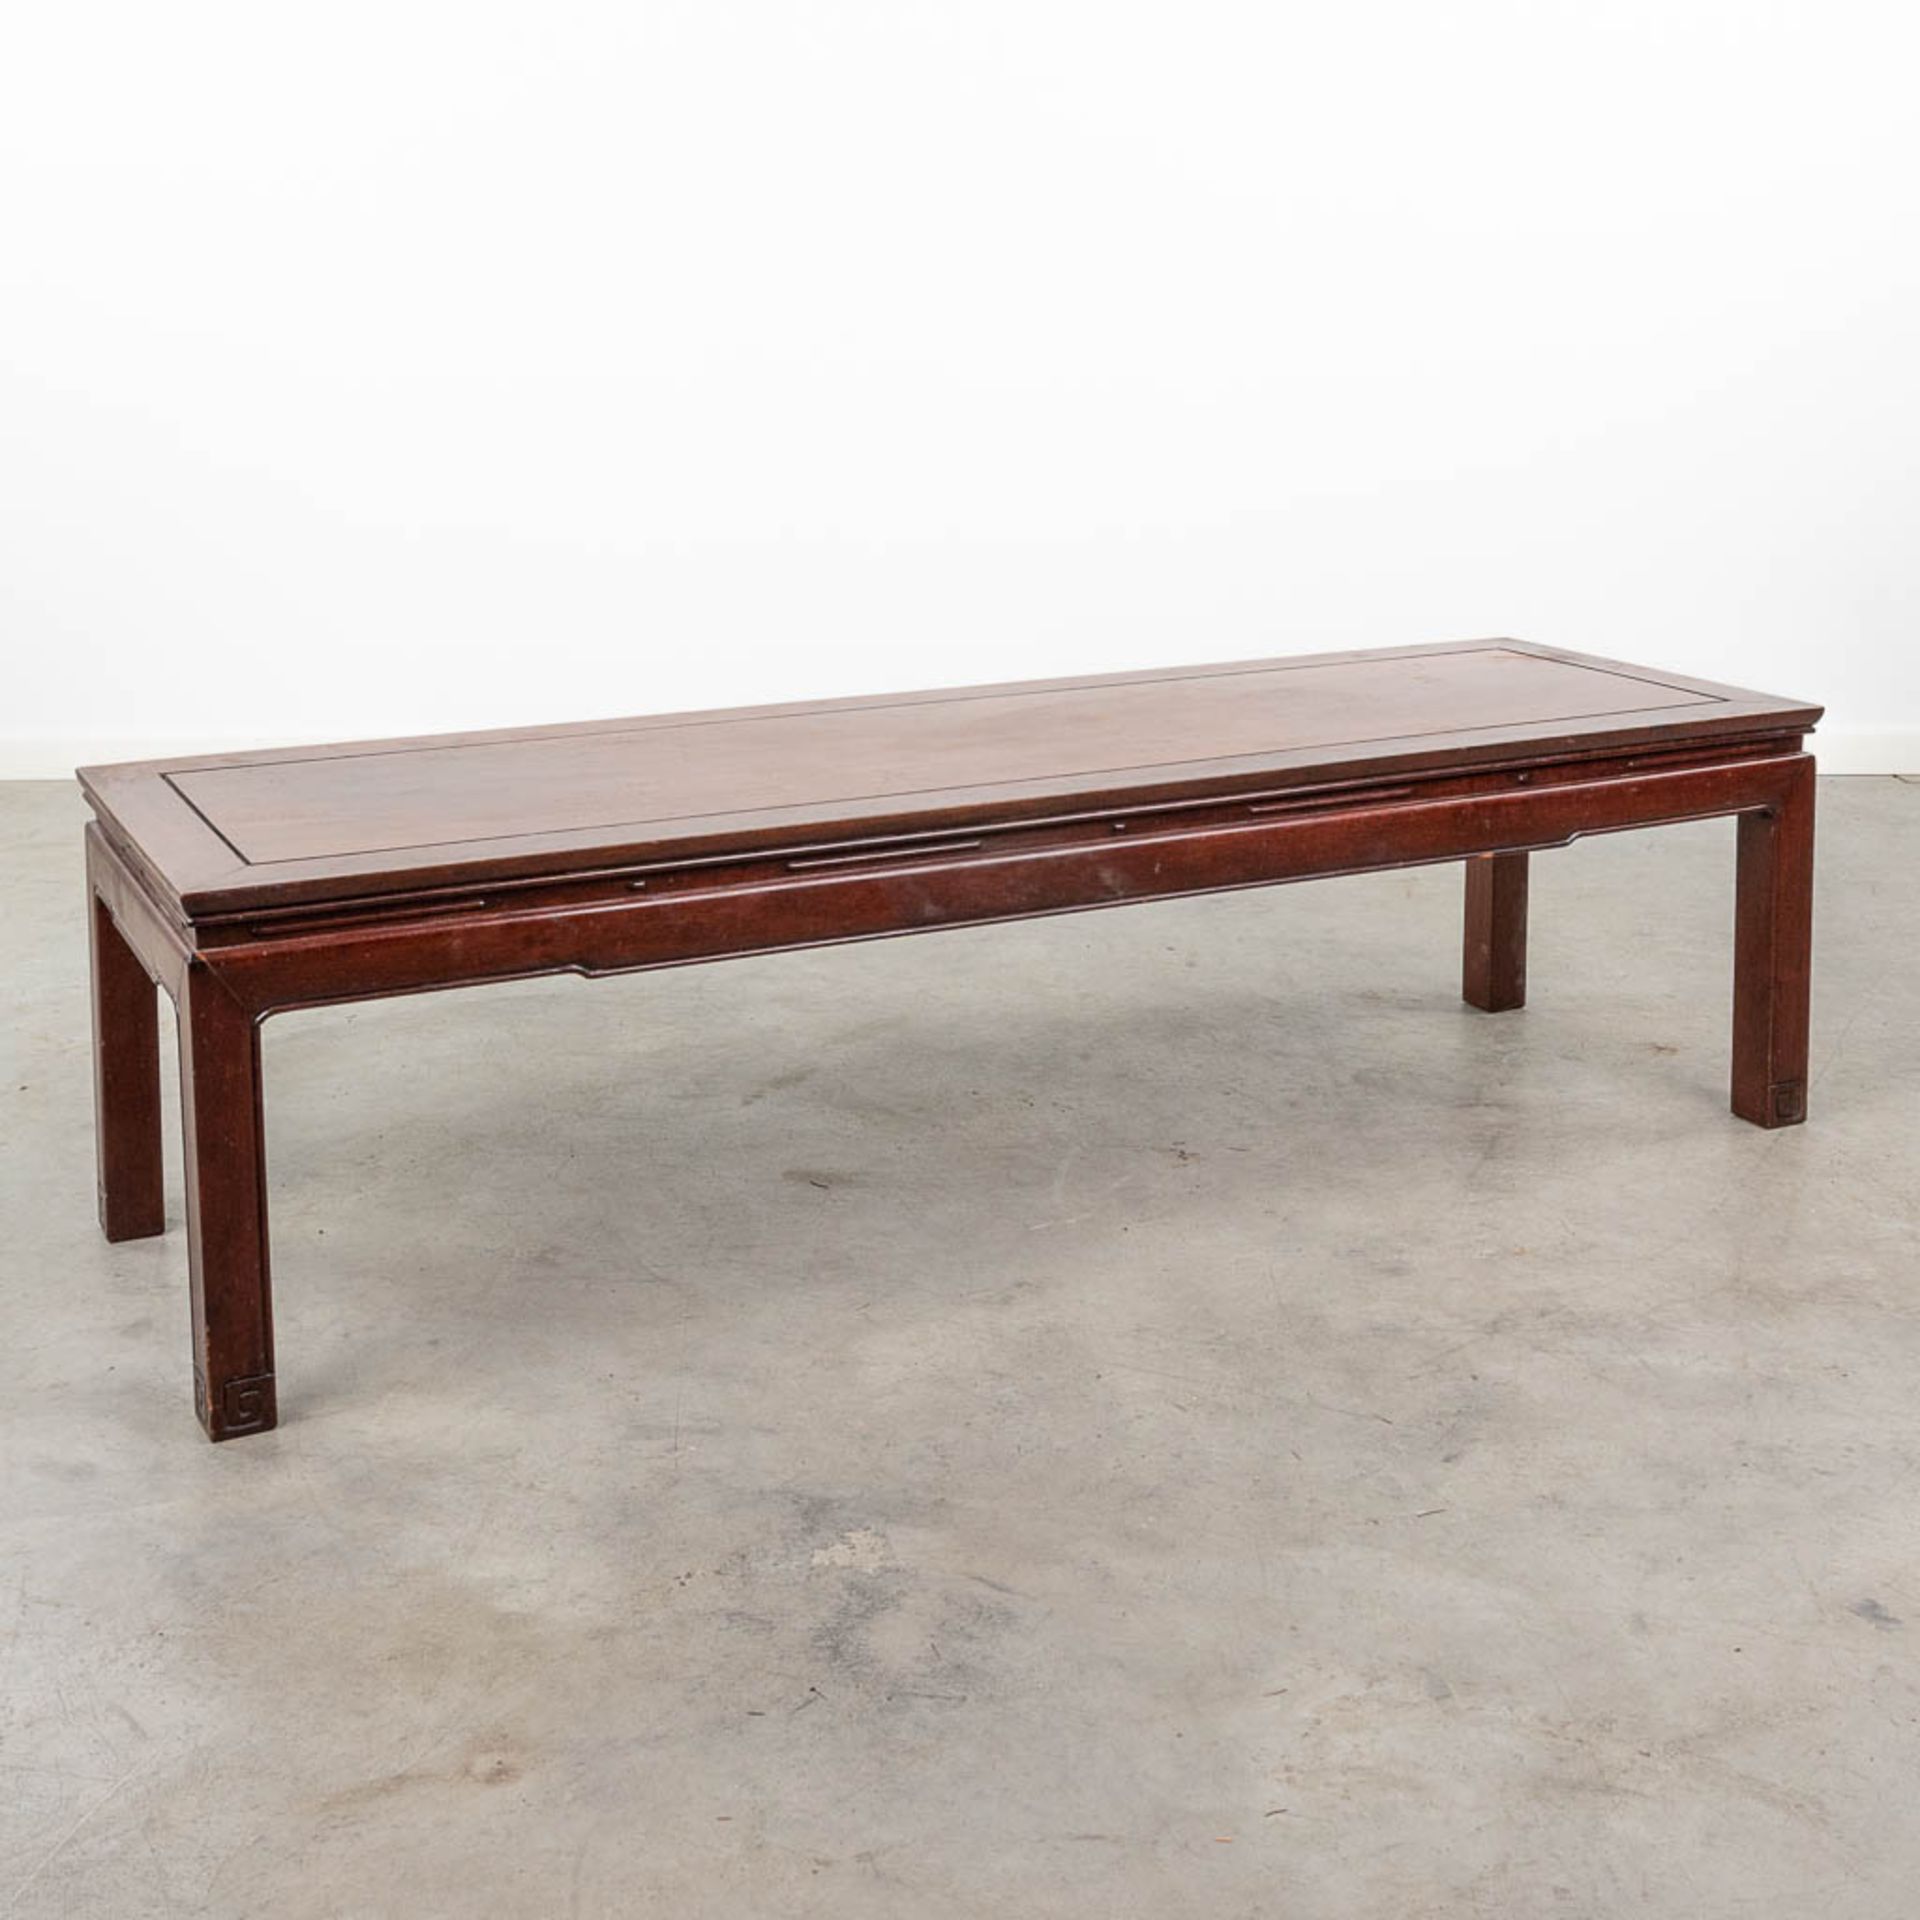 A Chinese coffee table made of hardwood. (L:46 x W:153 x H:41 cm)